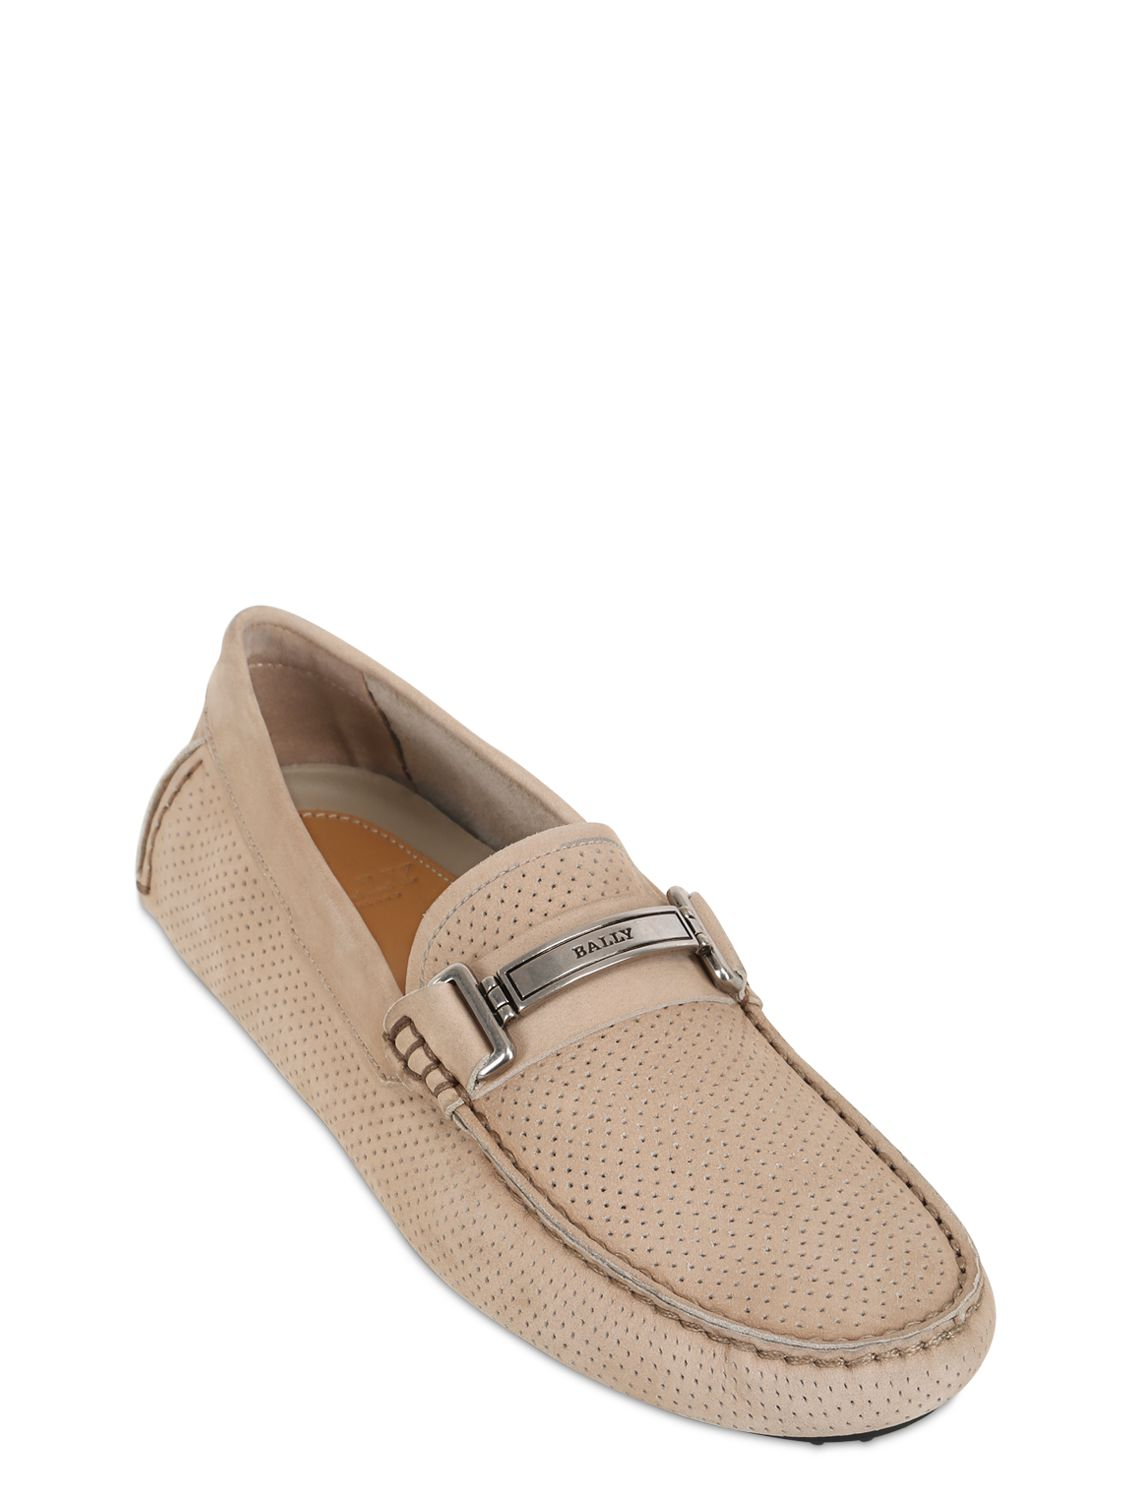 Bally Droteo Perforated Suede Driving Shoes in Beige for Men (DOVE ...